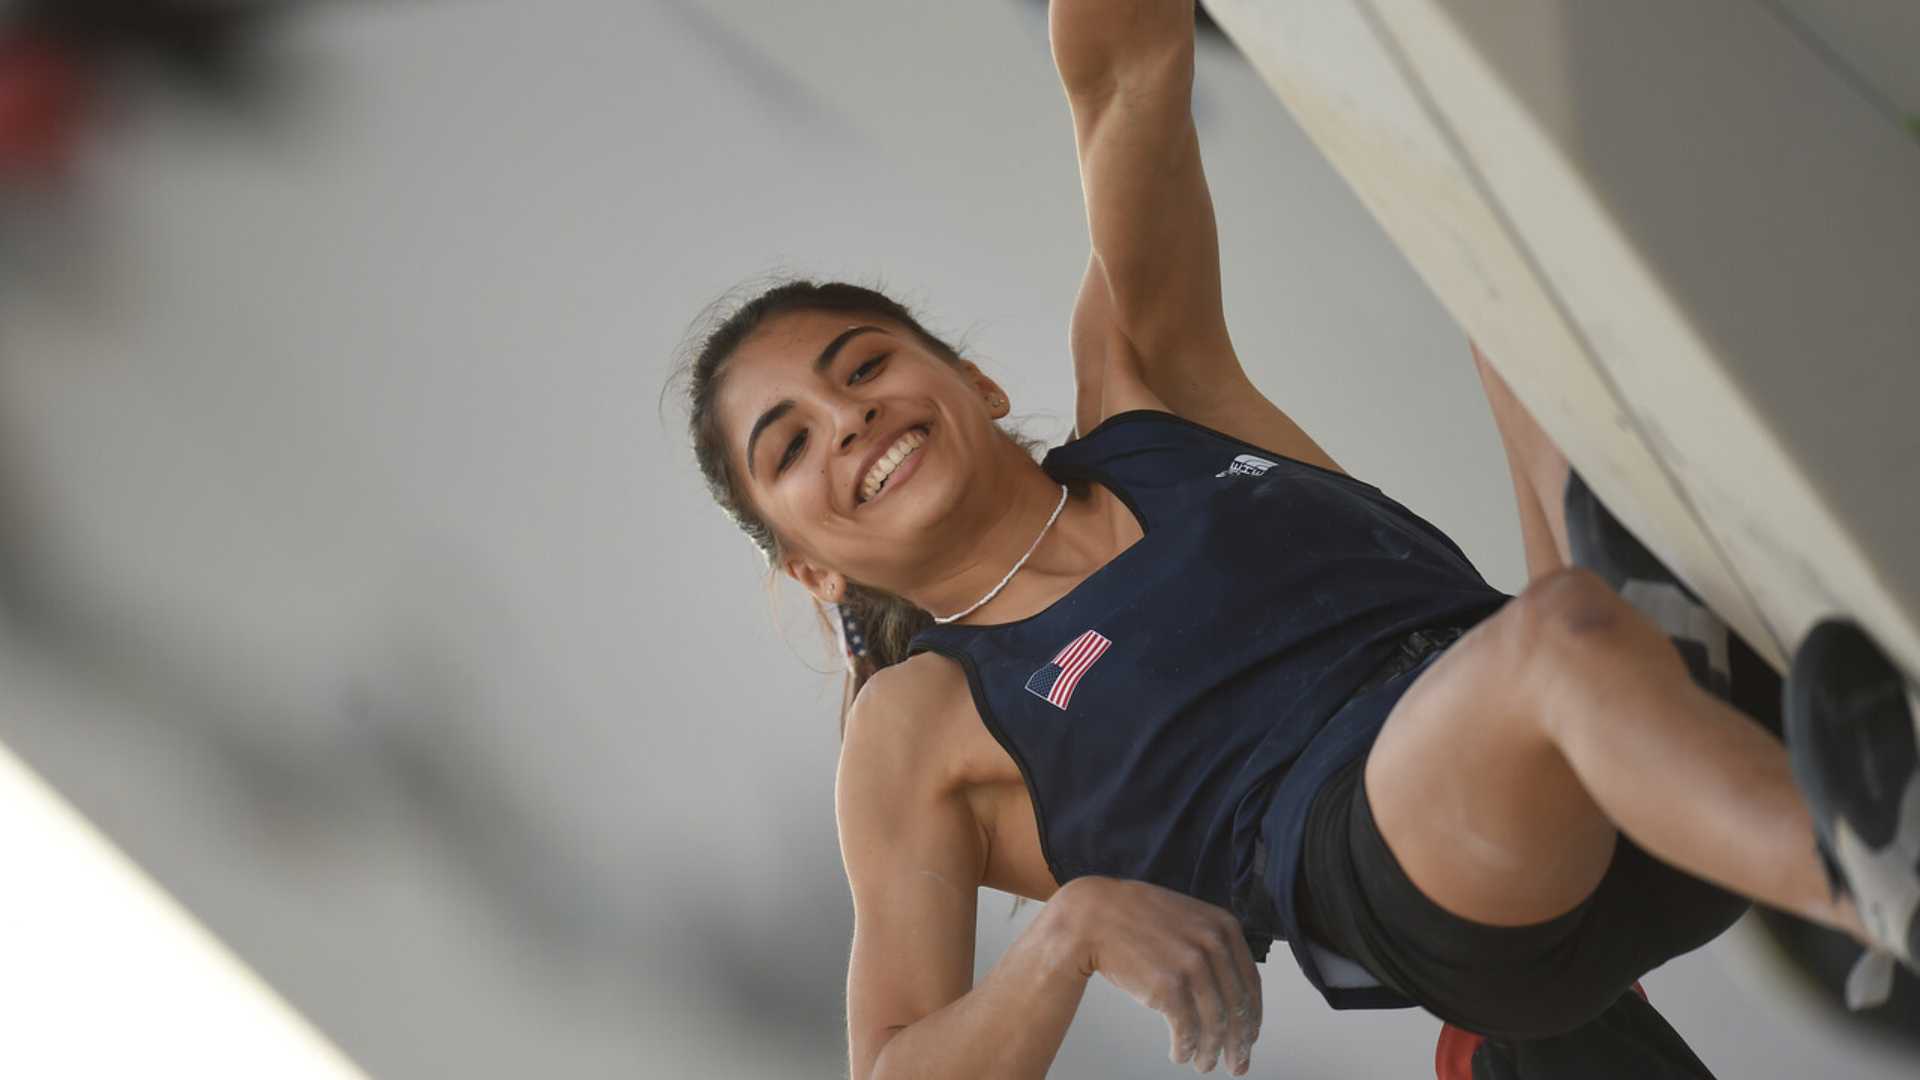 USA dominates in climbing and earns gold in female’s boulder, lead